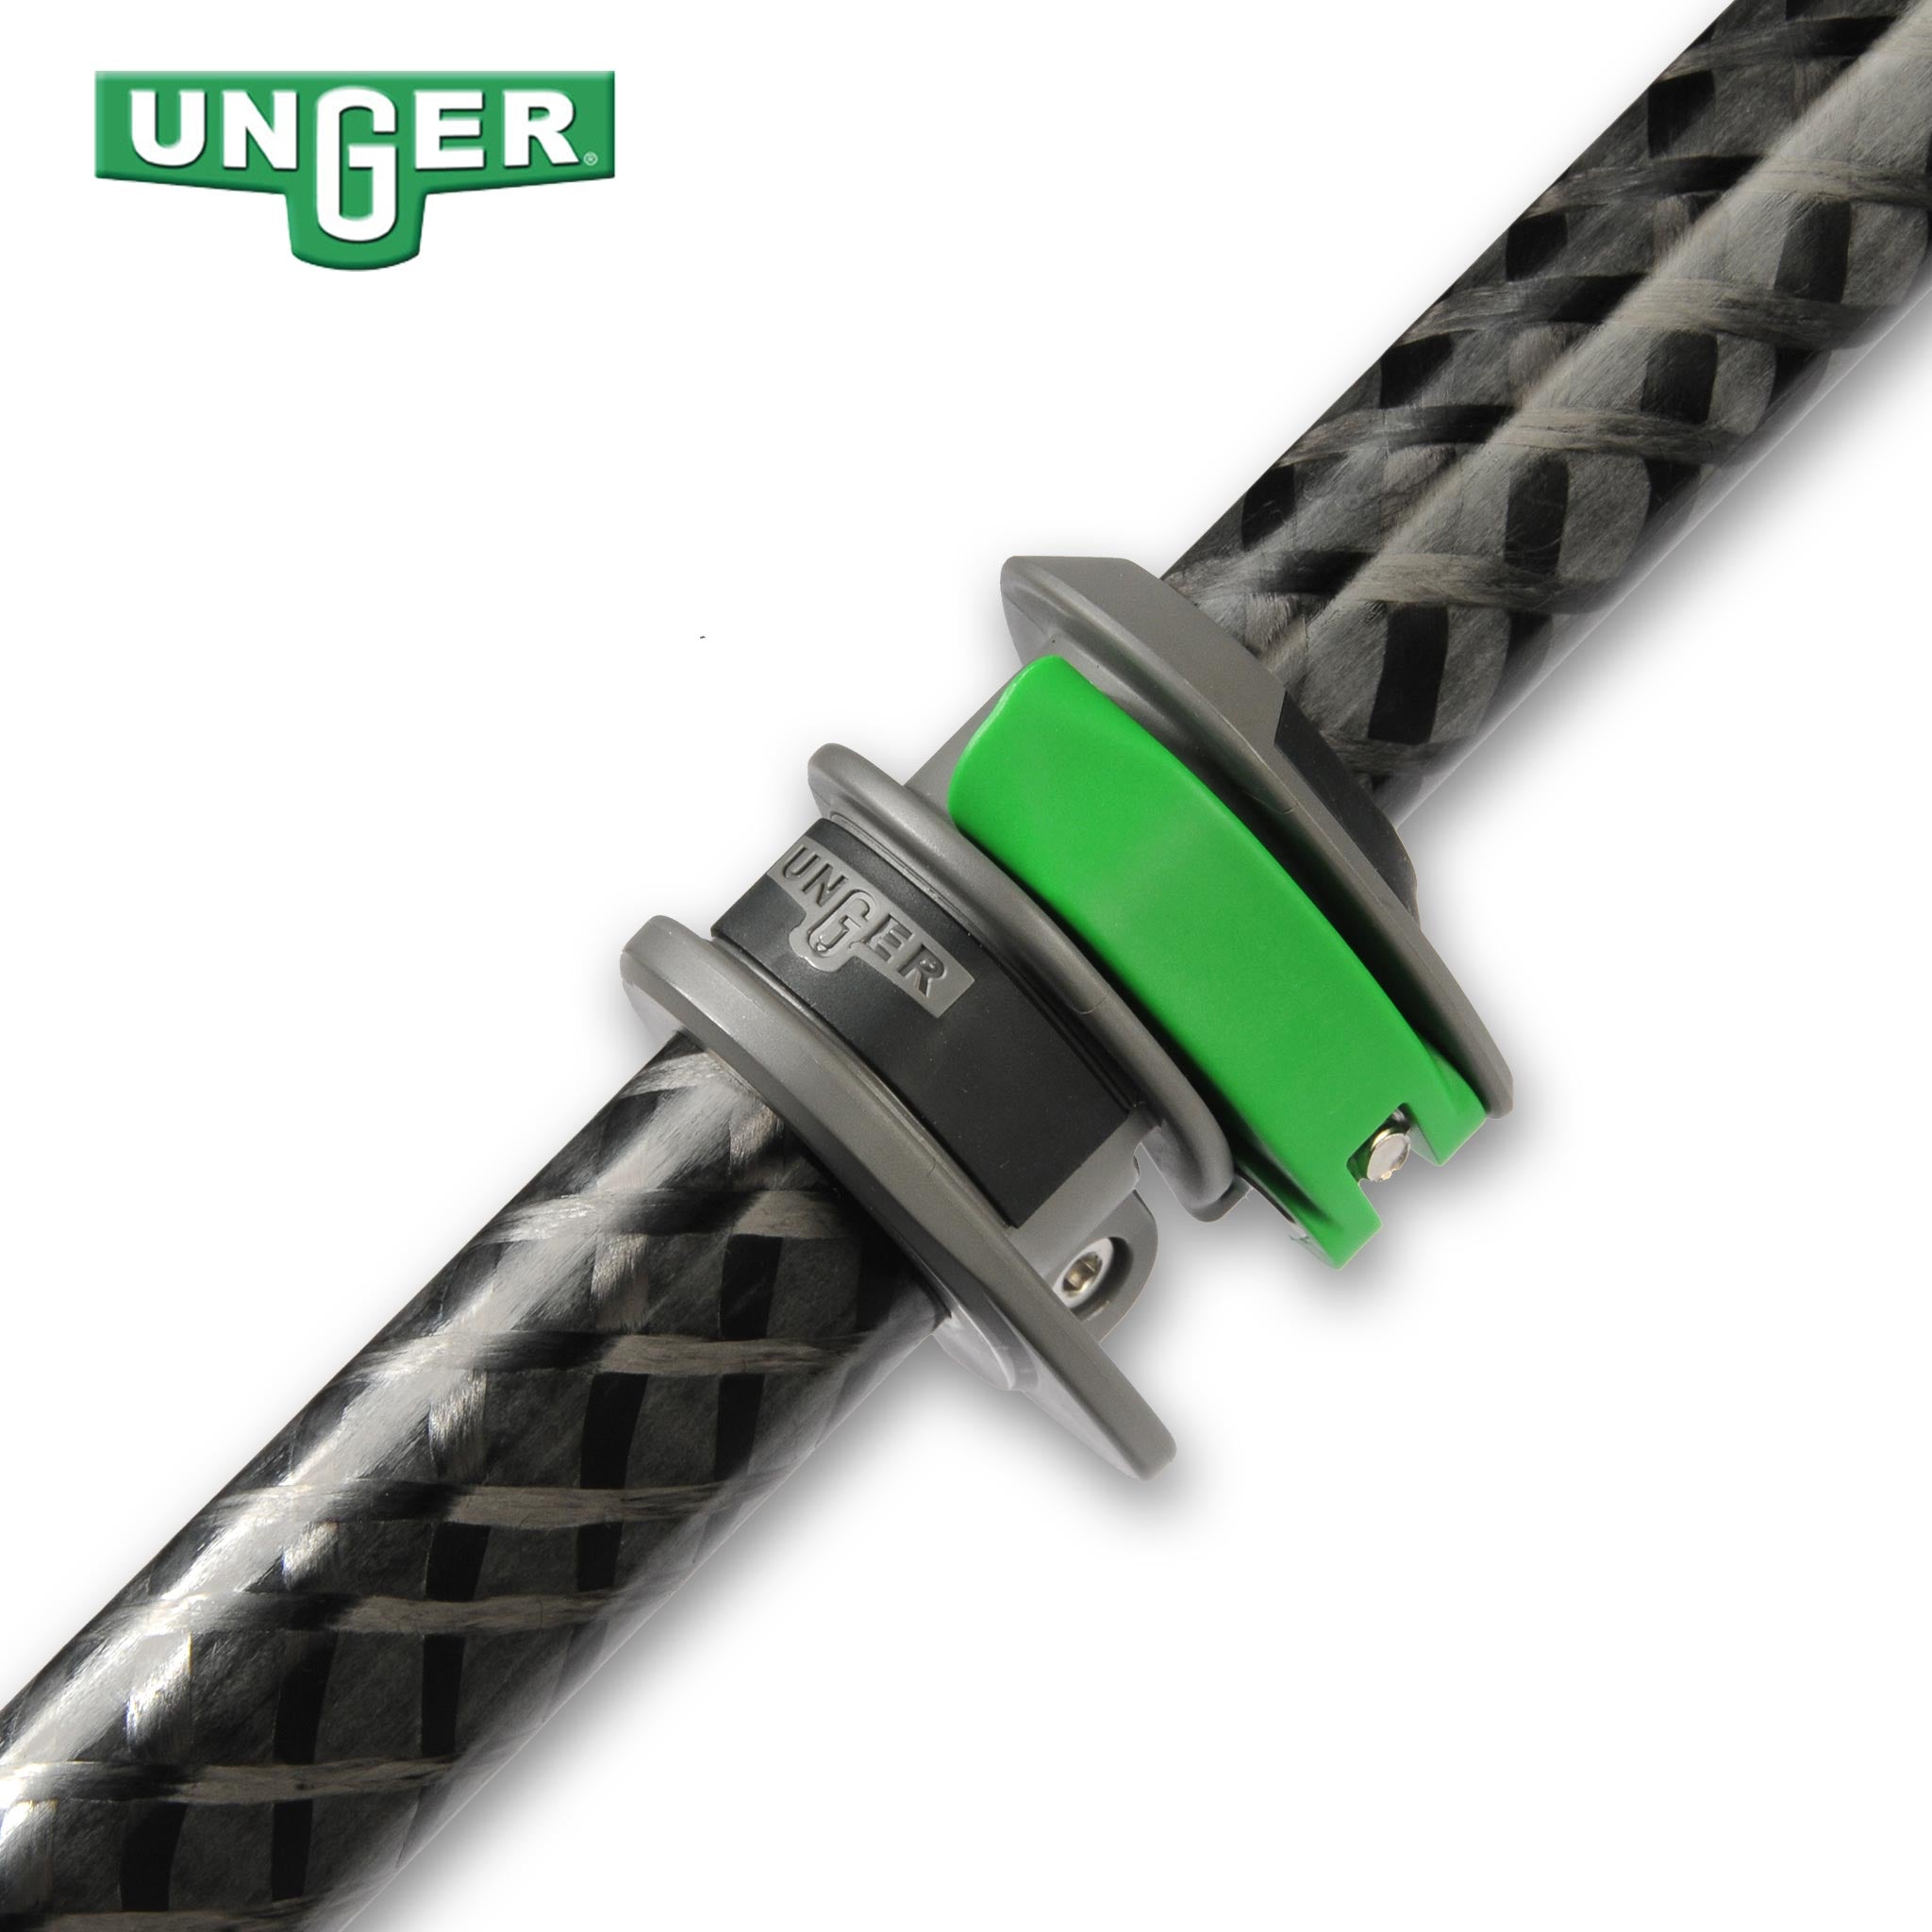 Unger nLite Oval Pole Clamp